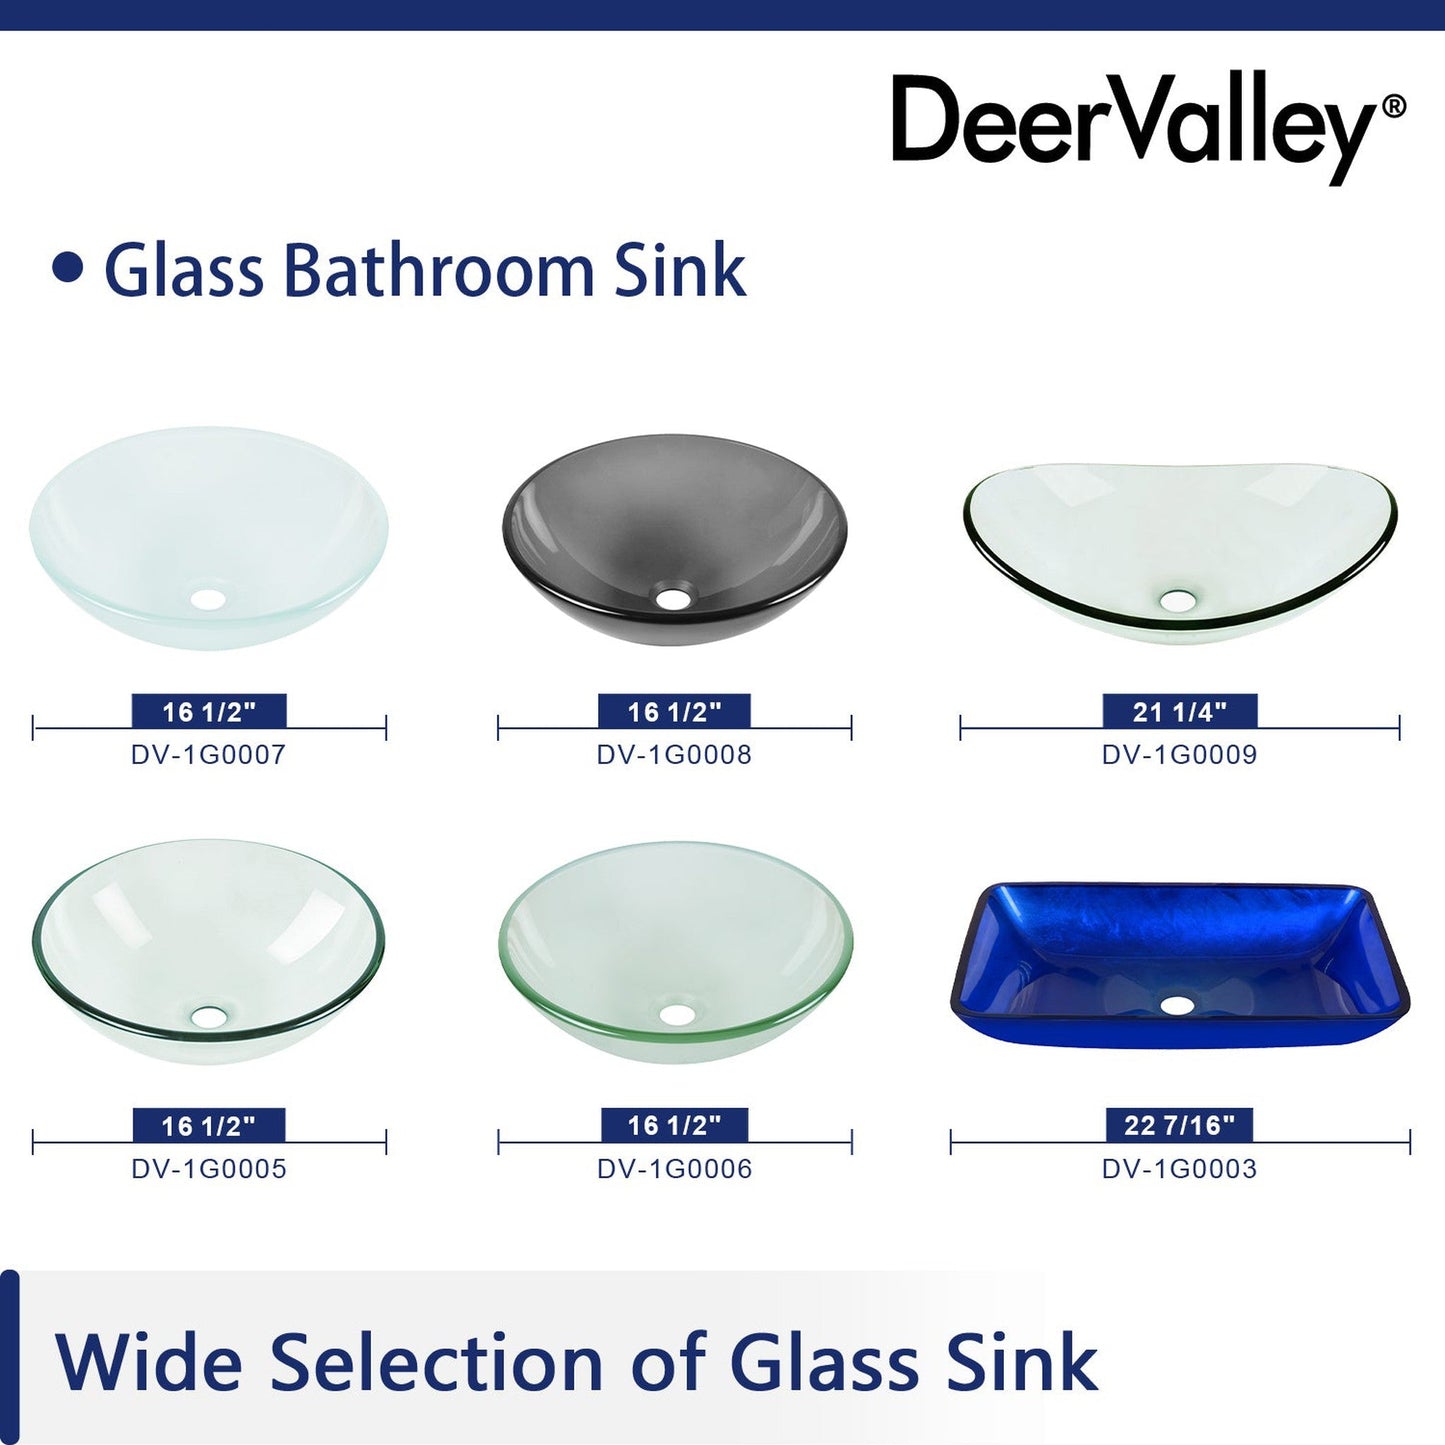 DeerValley Horizon 21" Oval Frosted Tempered Glass Bathroom Vessel Sink